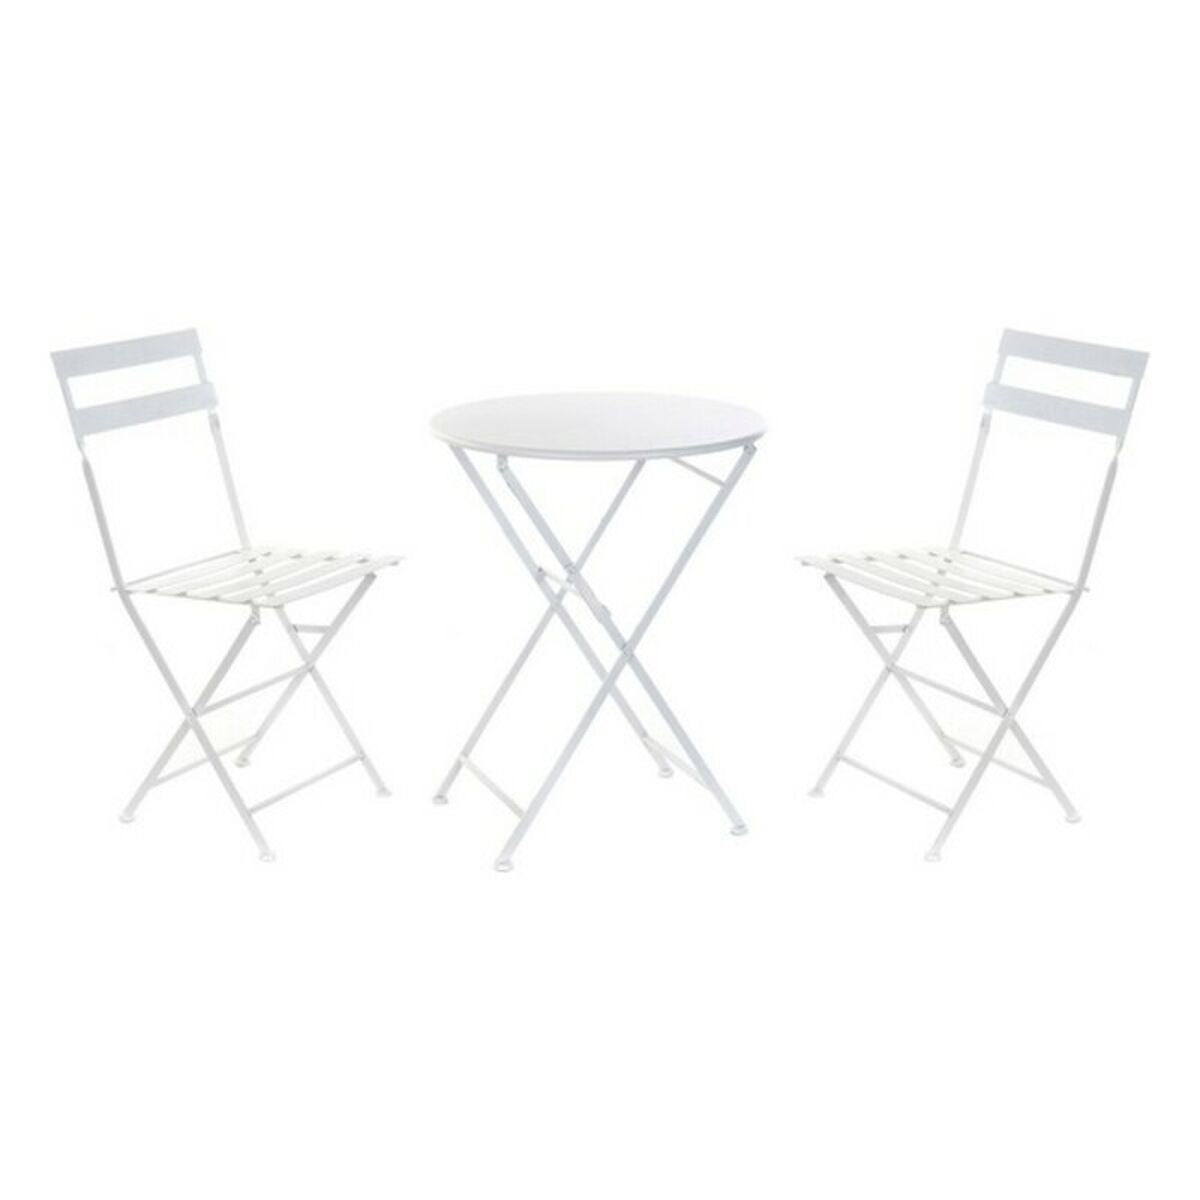 Table set with 2 chairs DKD Home Decor White 80 cm 60 x 60 x 70 cm (3